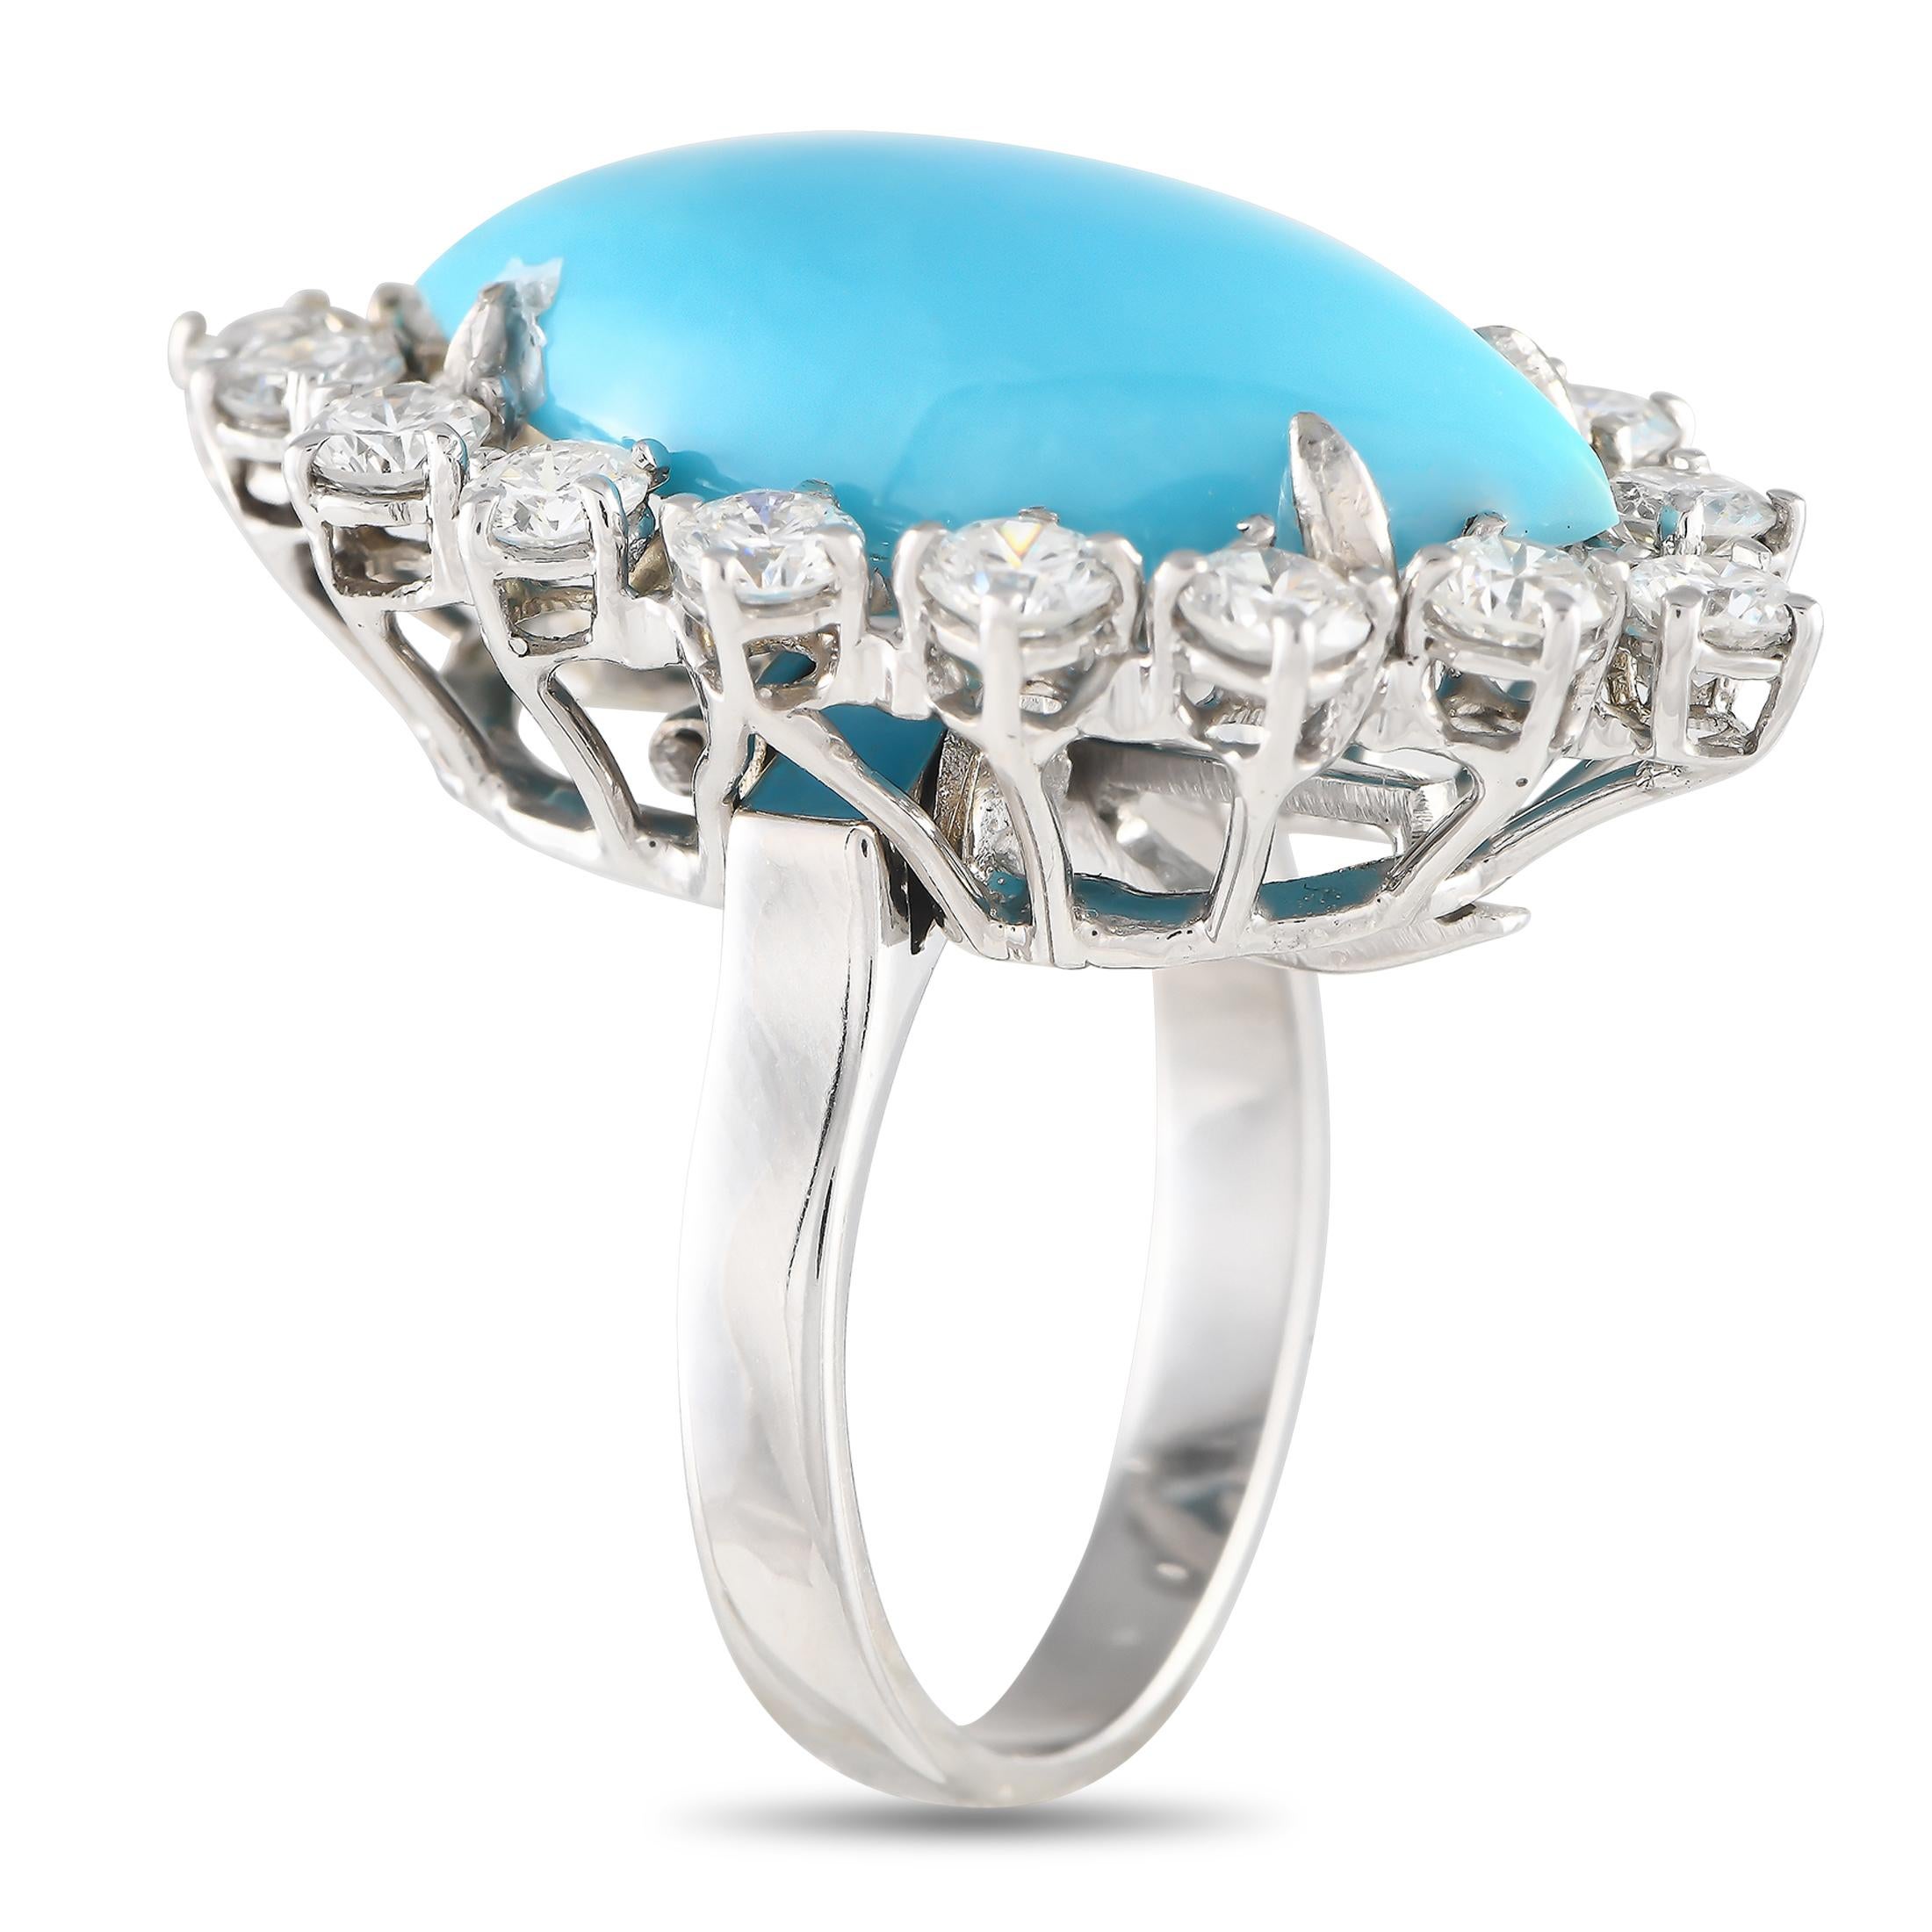 Theres more to this luxurious piece than initially meets the eye. A bold Turquoise cabochon is surrounded by a halo of diamonds totaling 1.60 carats on this radiant ring, which features a 2mm wide band and a 10mm top height. Slip of the center